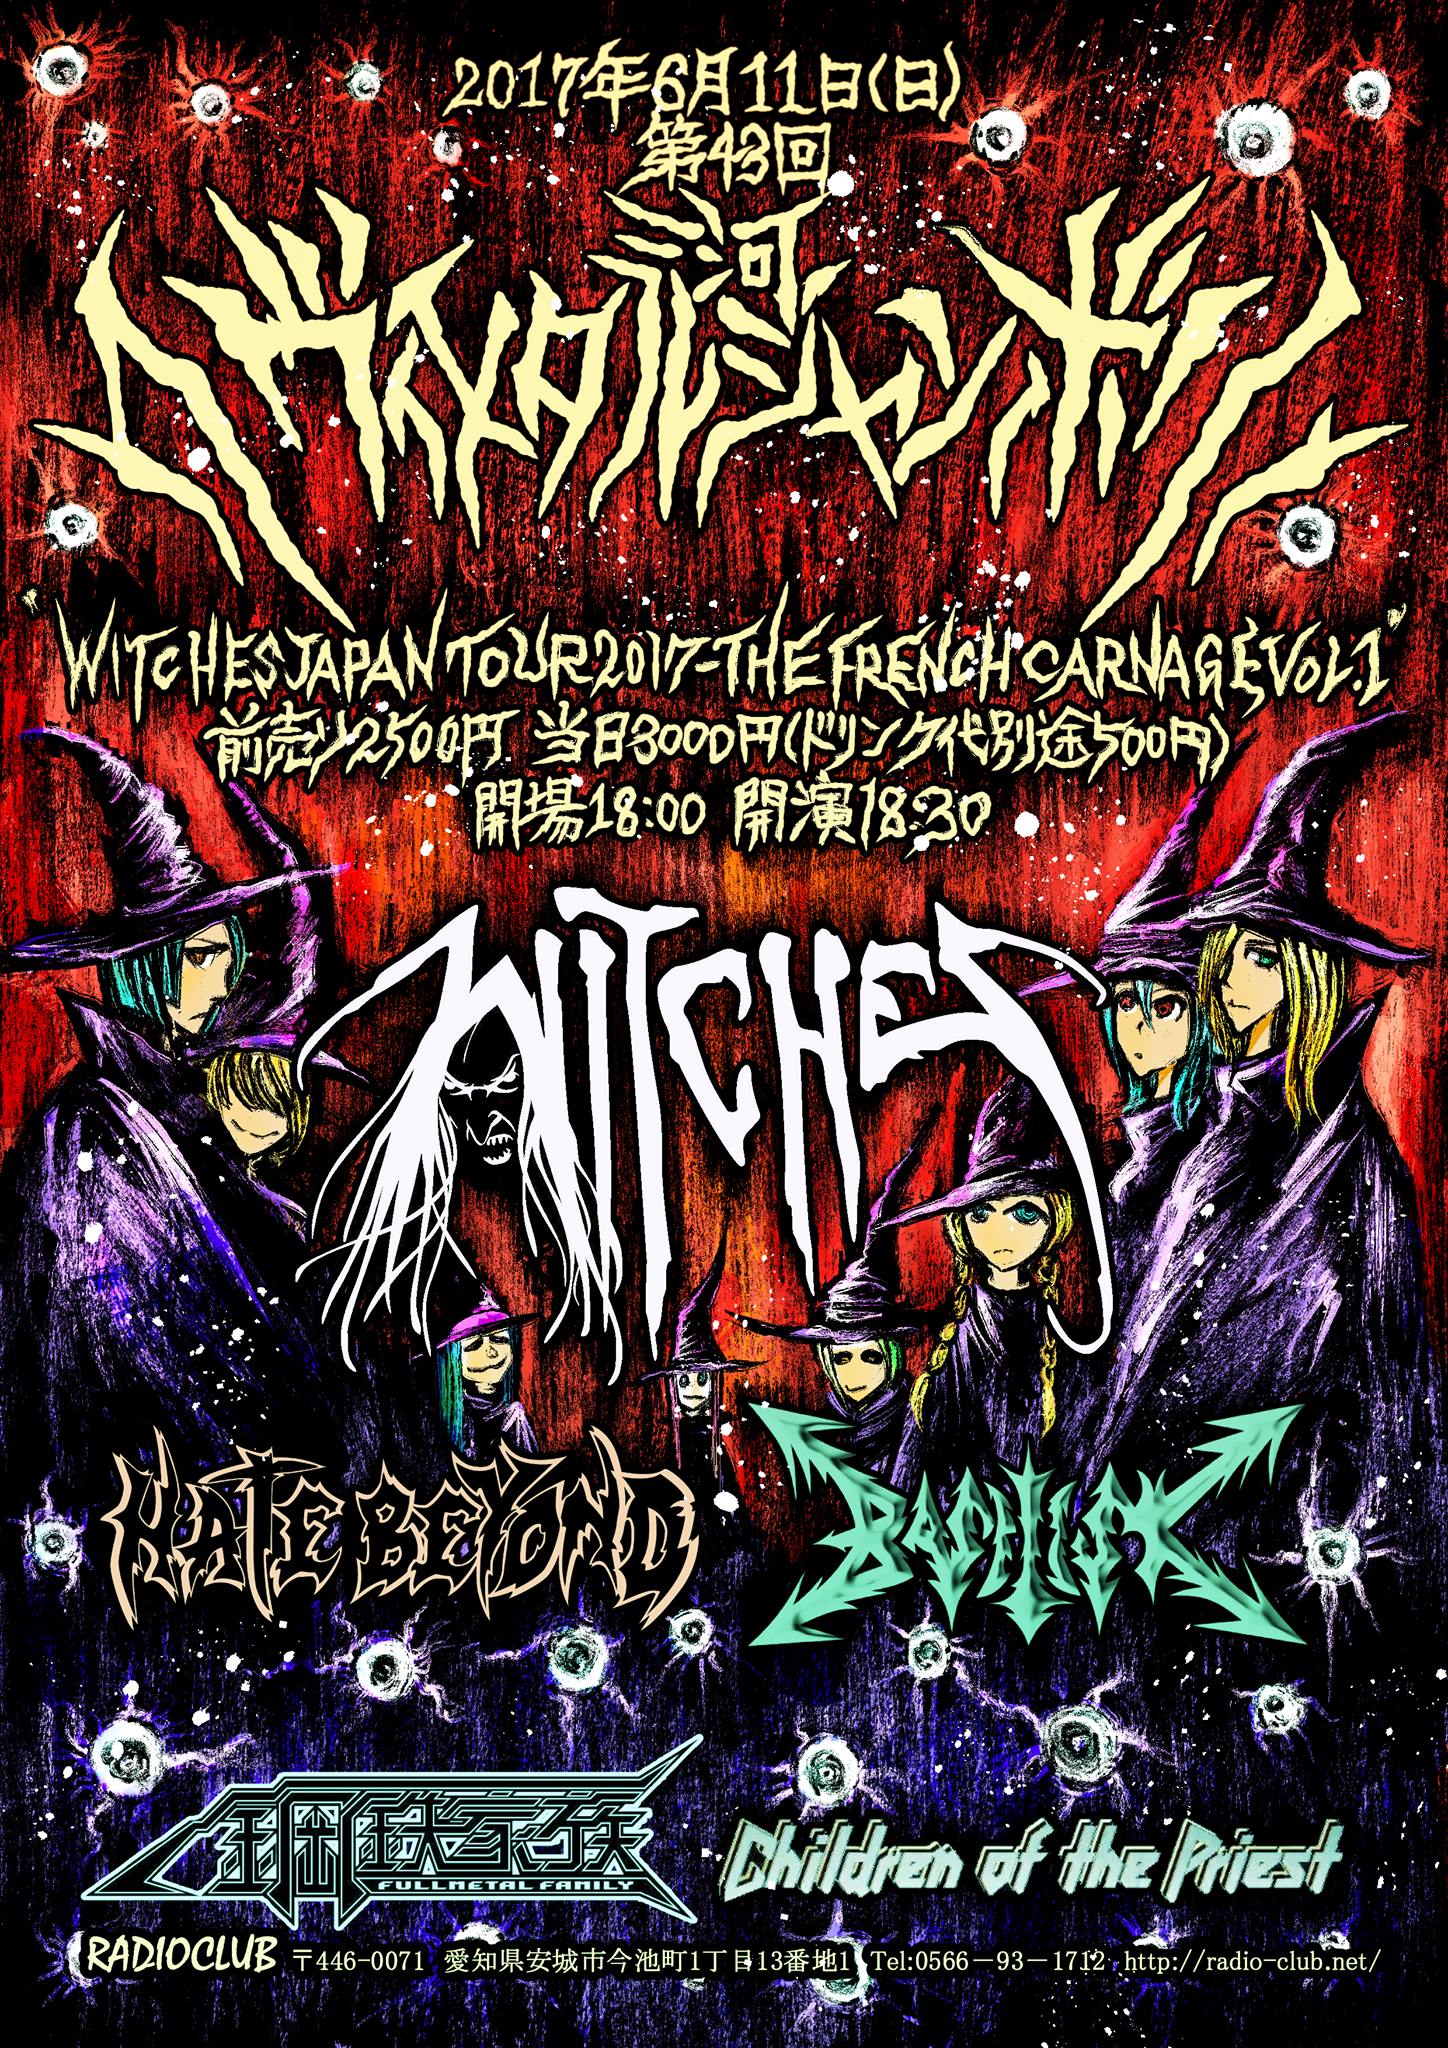 Witches flyer WITCHES + Hate Beyond + Basilisk + 鋼鉄家族 + Children of the priest  @ Witches JAPAN TOUR 2017 安城市 RADIO CLUB Aichi, Anjyo, JAPAN